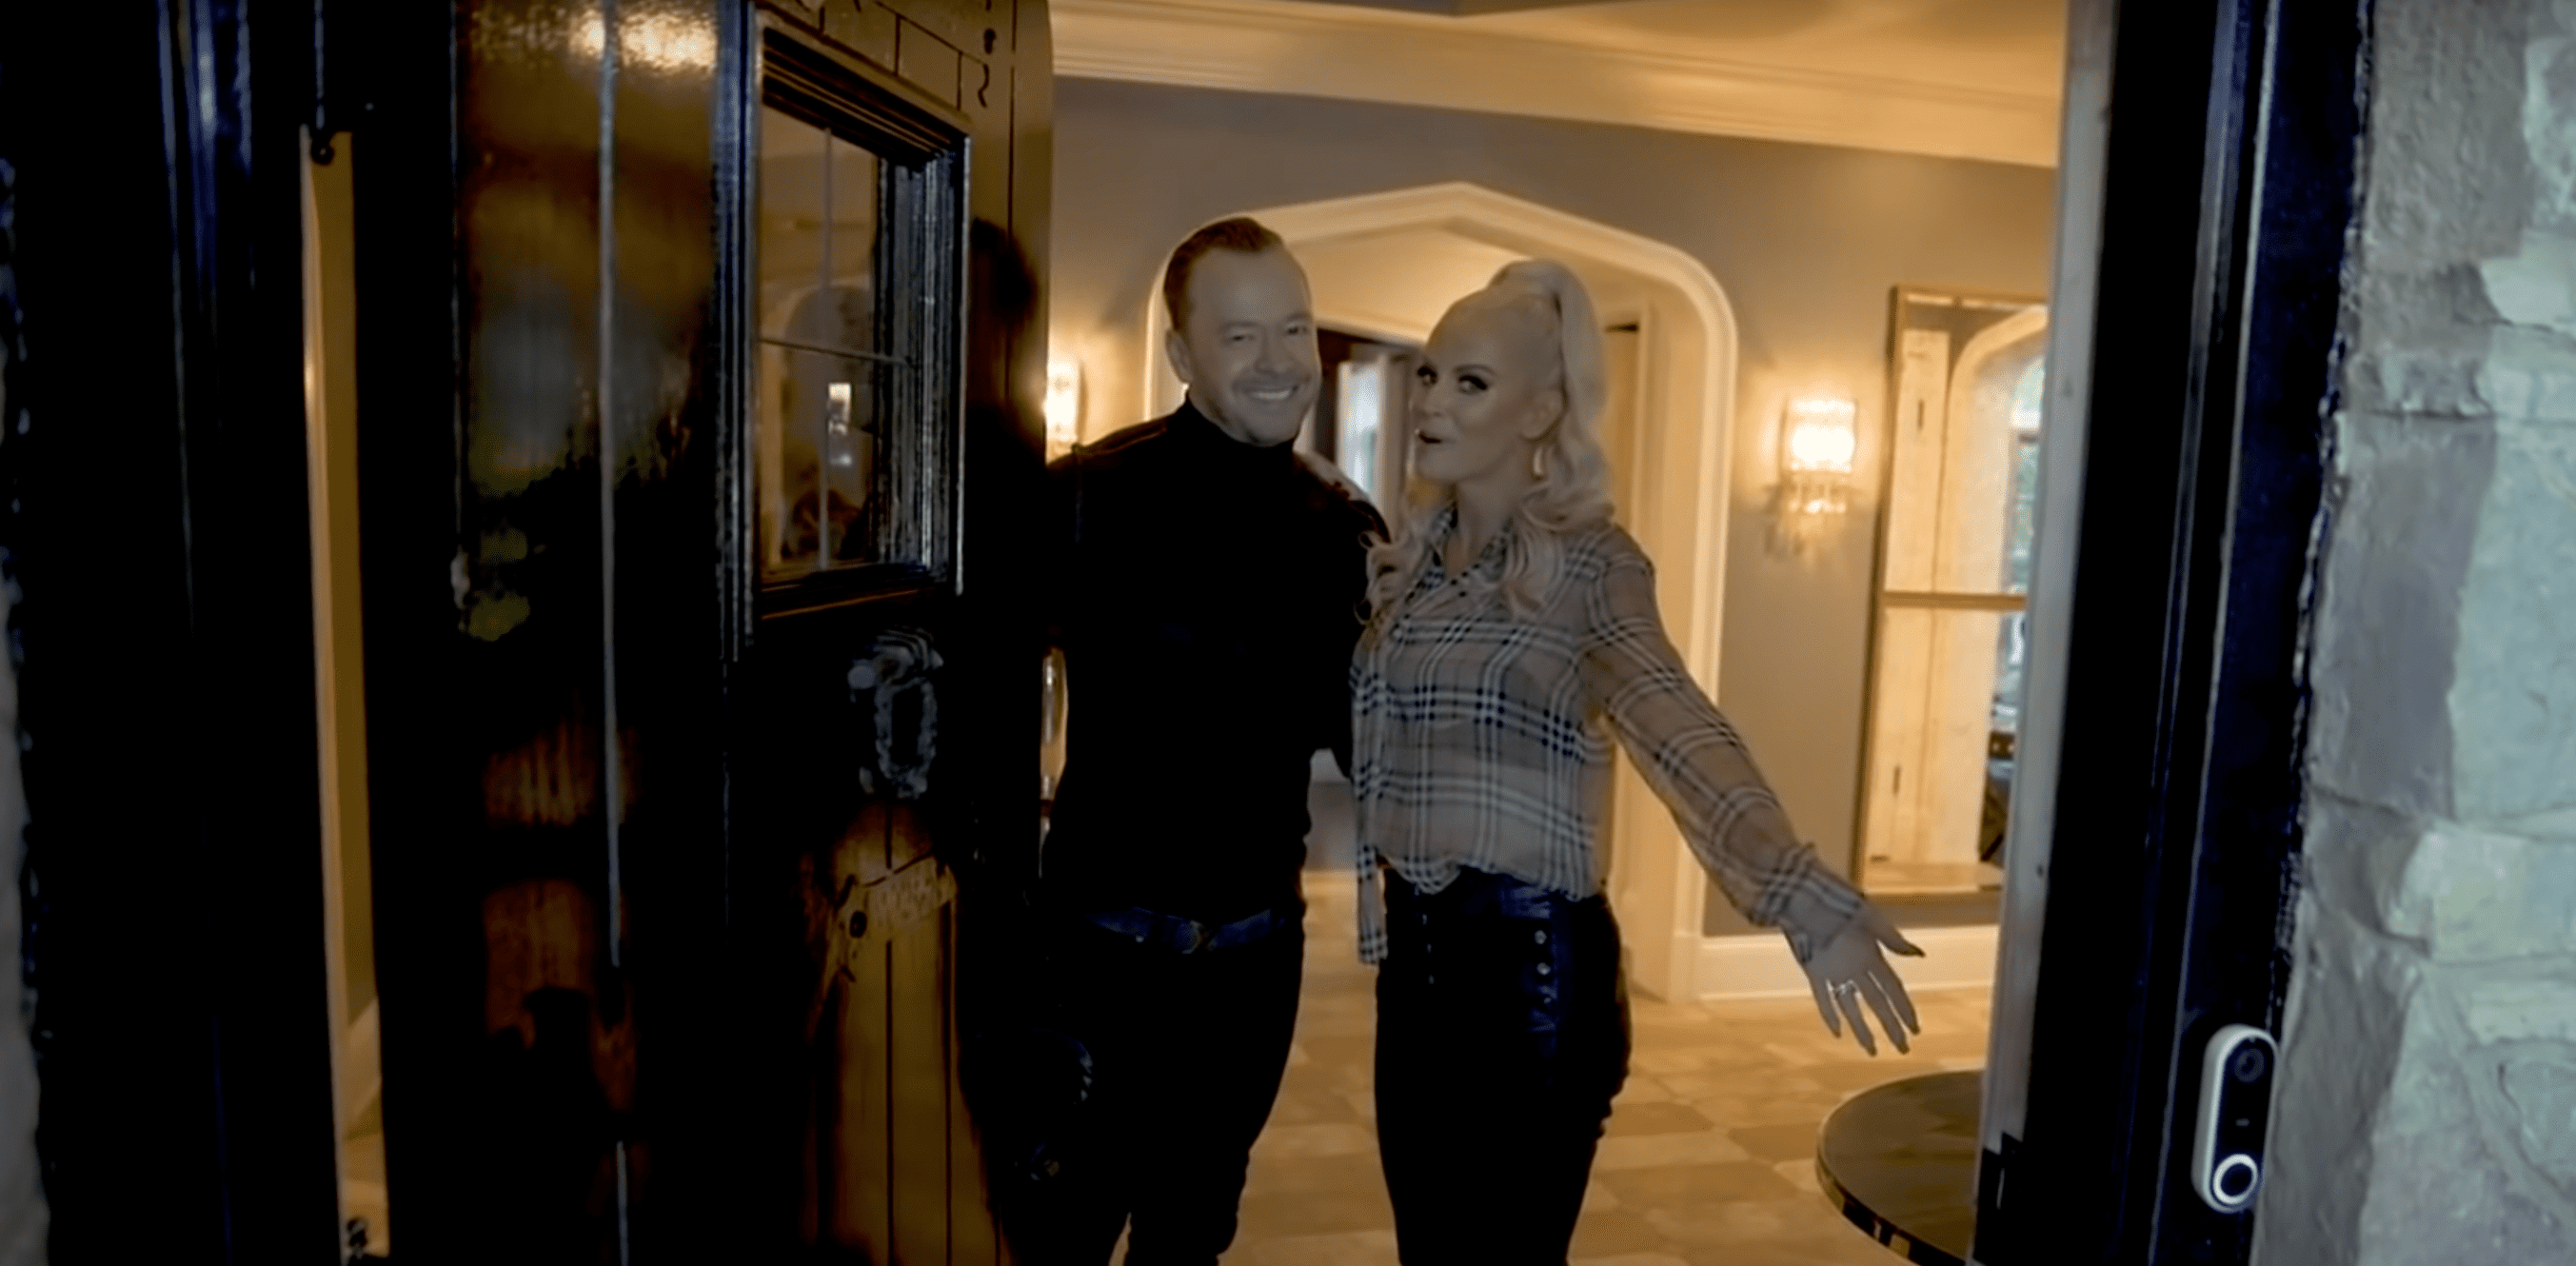 A look inside Jenny McCarthy and Donnie Wahlberg’s Chicago home on October 11, 2019 | Source: YouTube/People